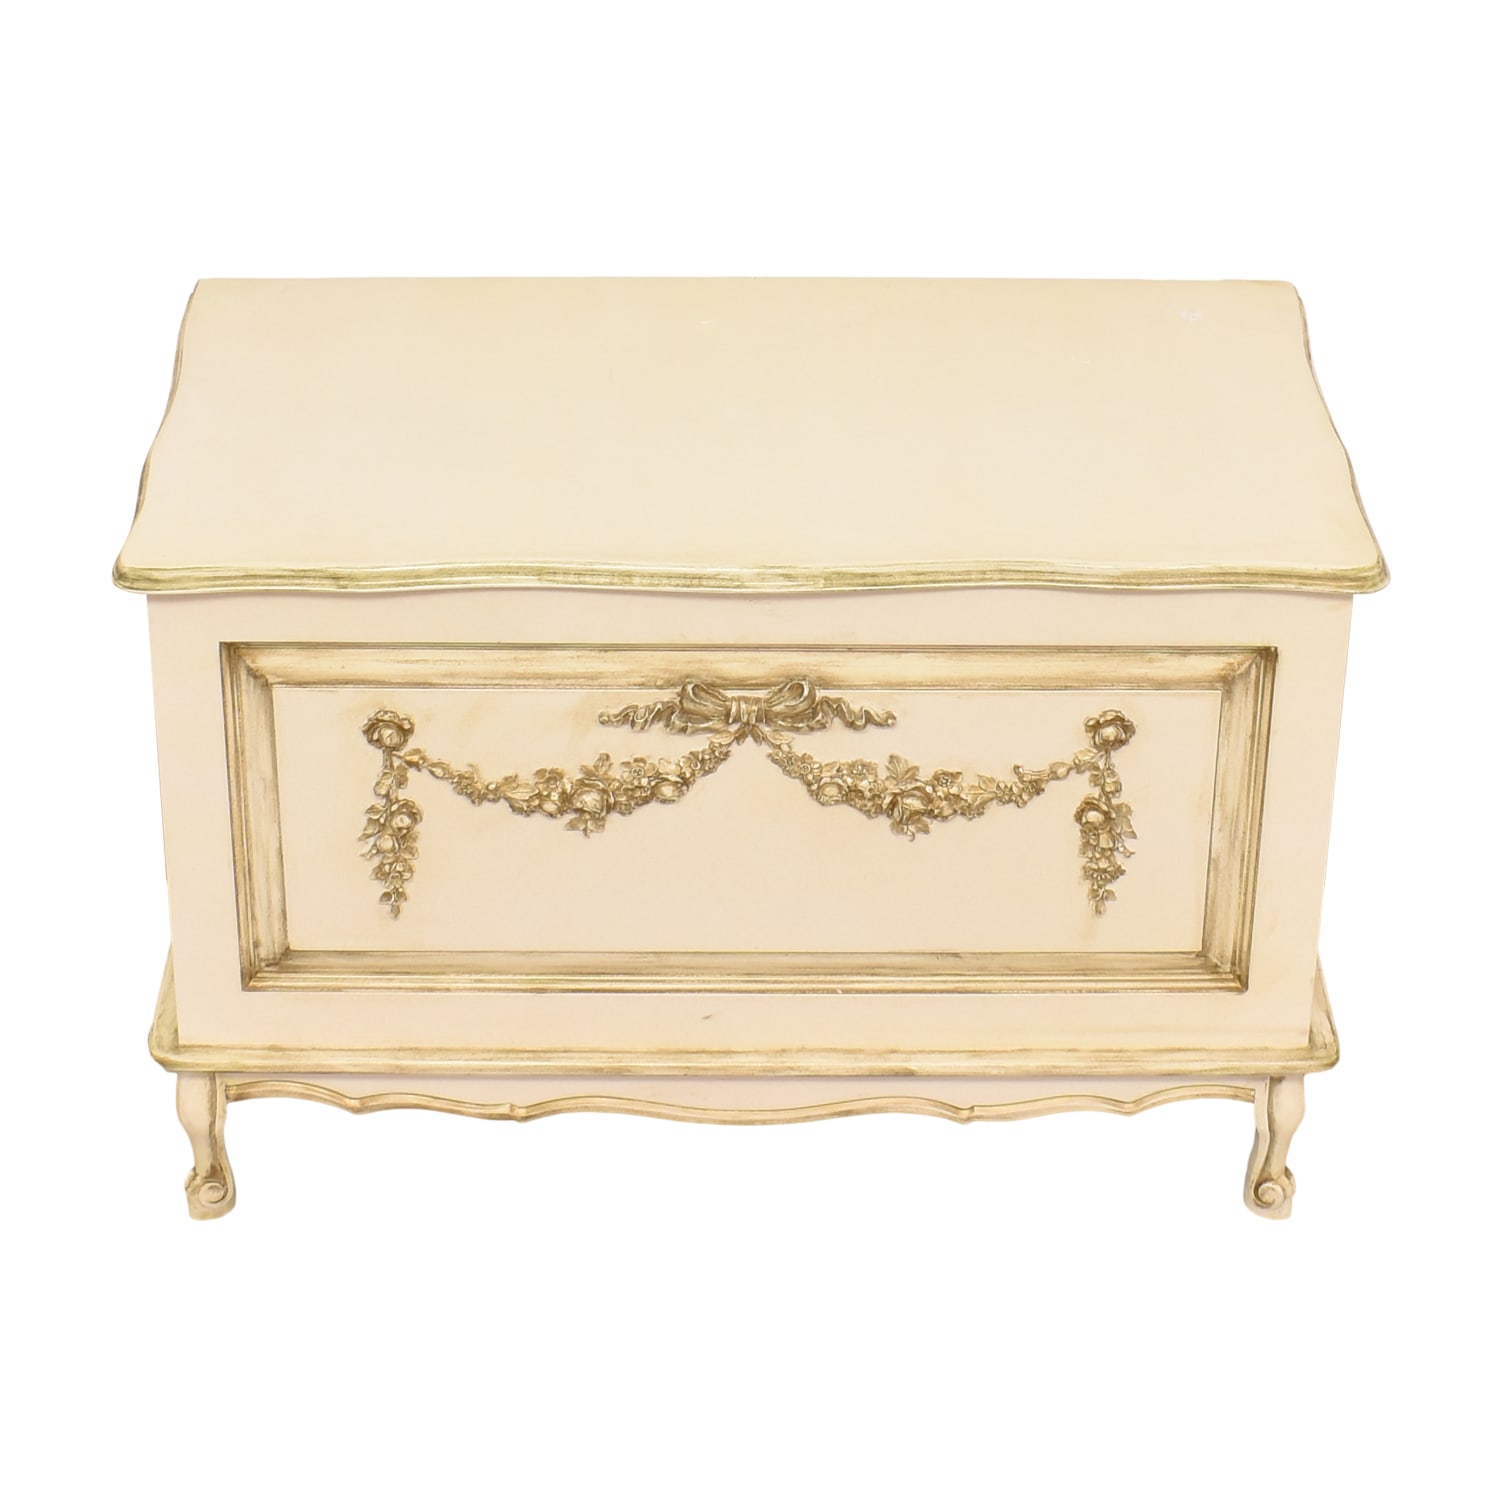 https://res.cloudinary.com/dkqtxtobb/image/upload/f_auto,q_auto:best,w_1500/product-assets/424056/afk-furniture/storage/trunks/afk-furniture-french-toy-chest-used.jpeg